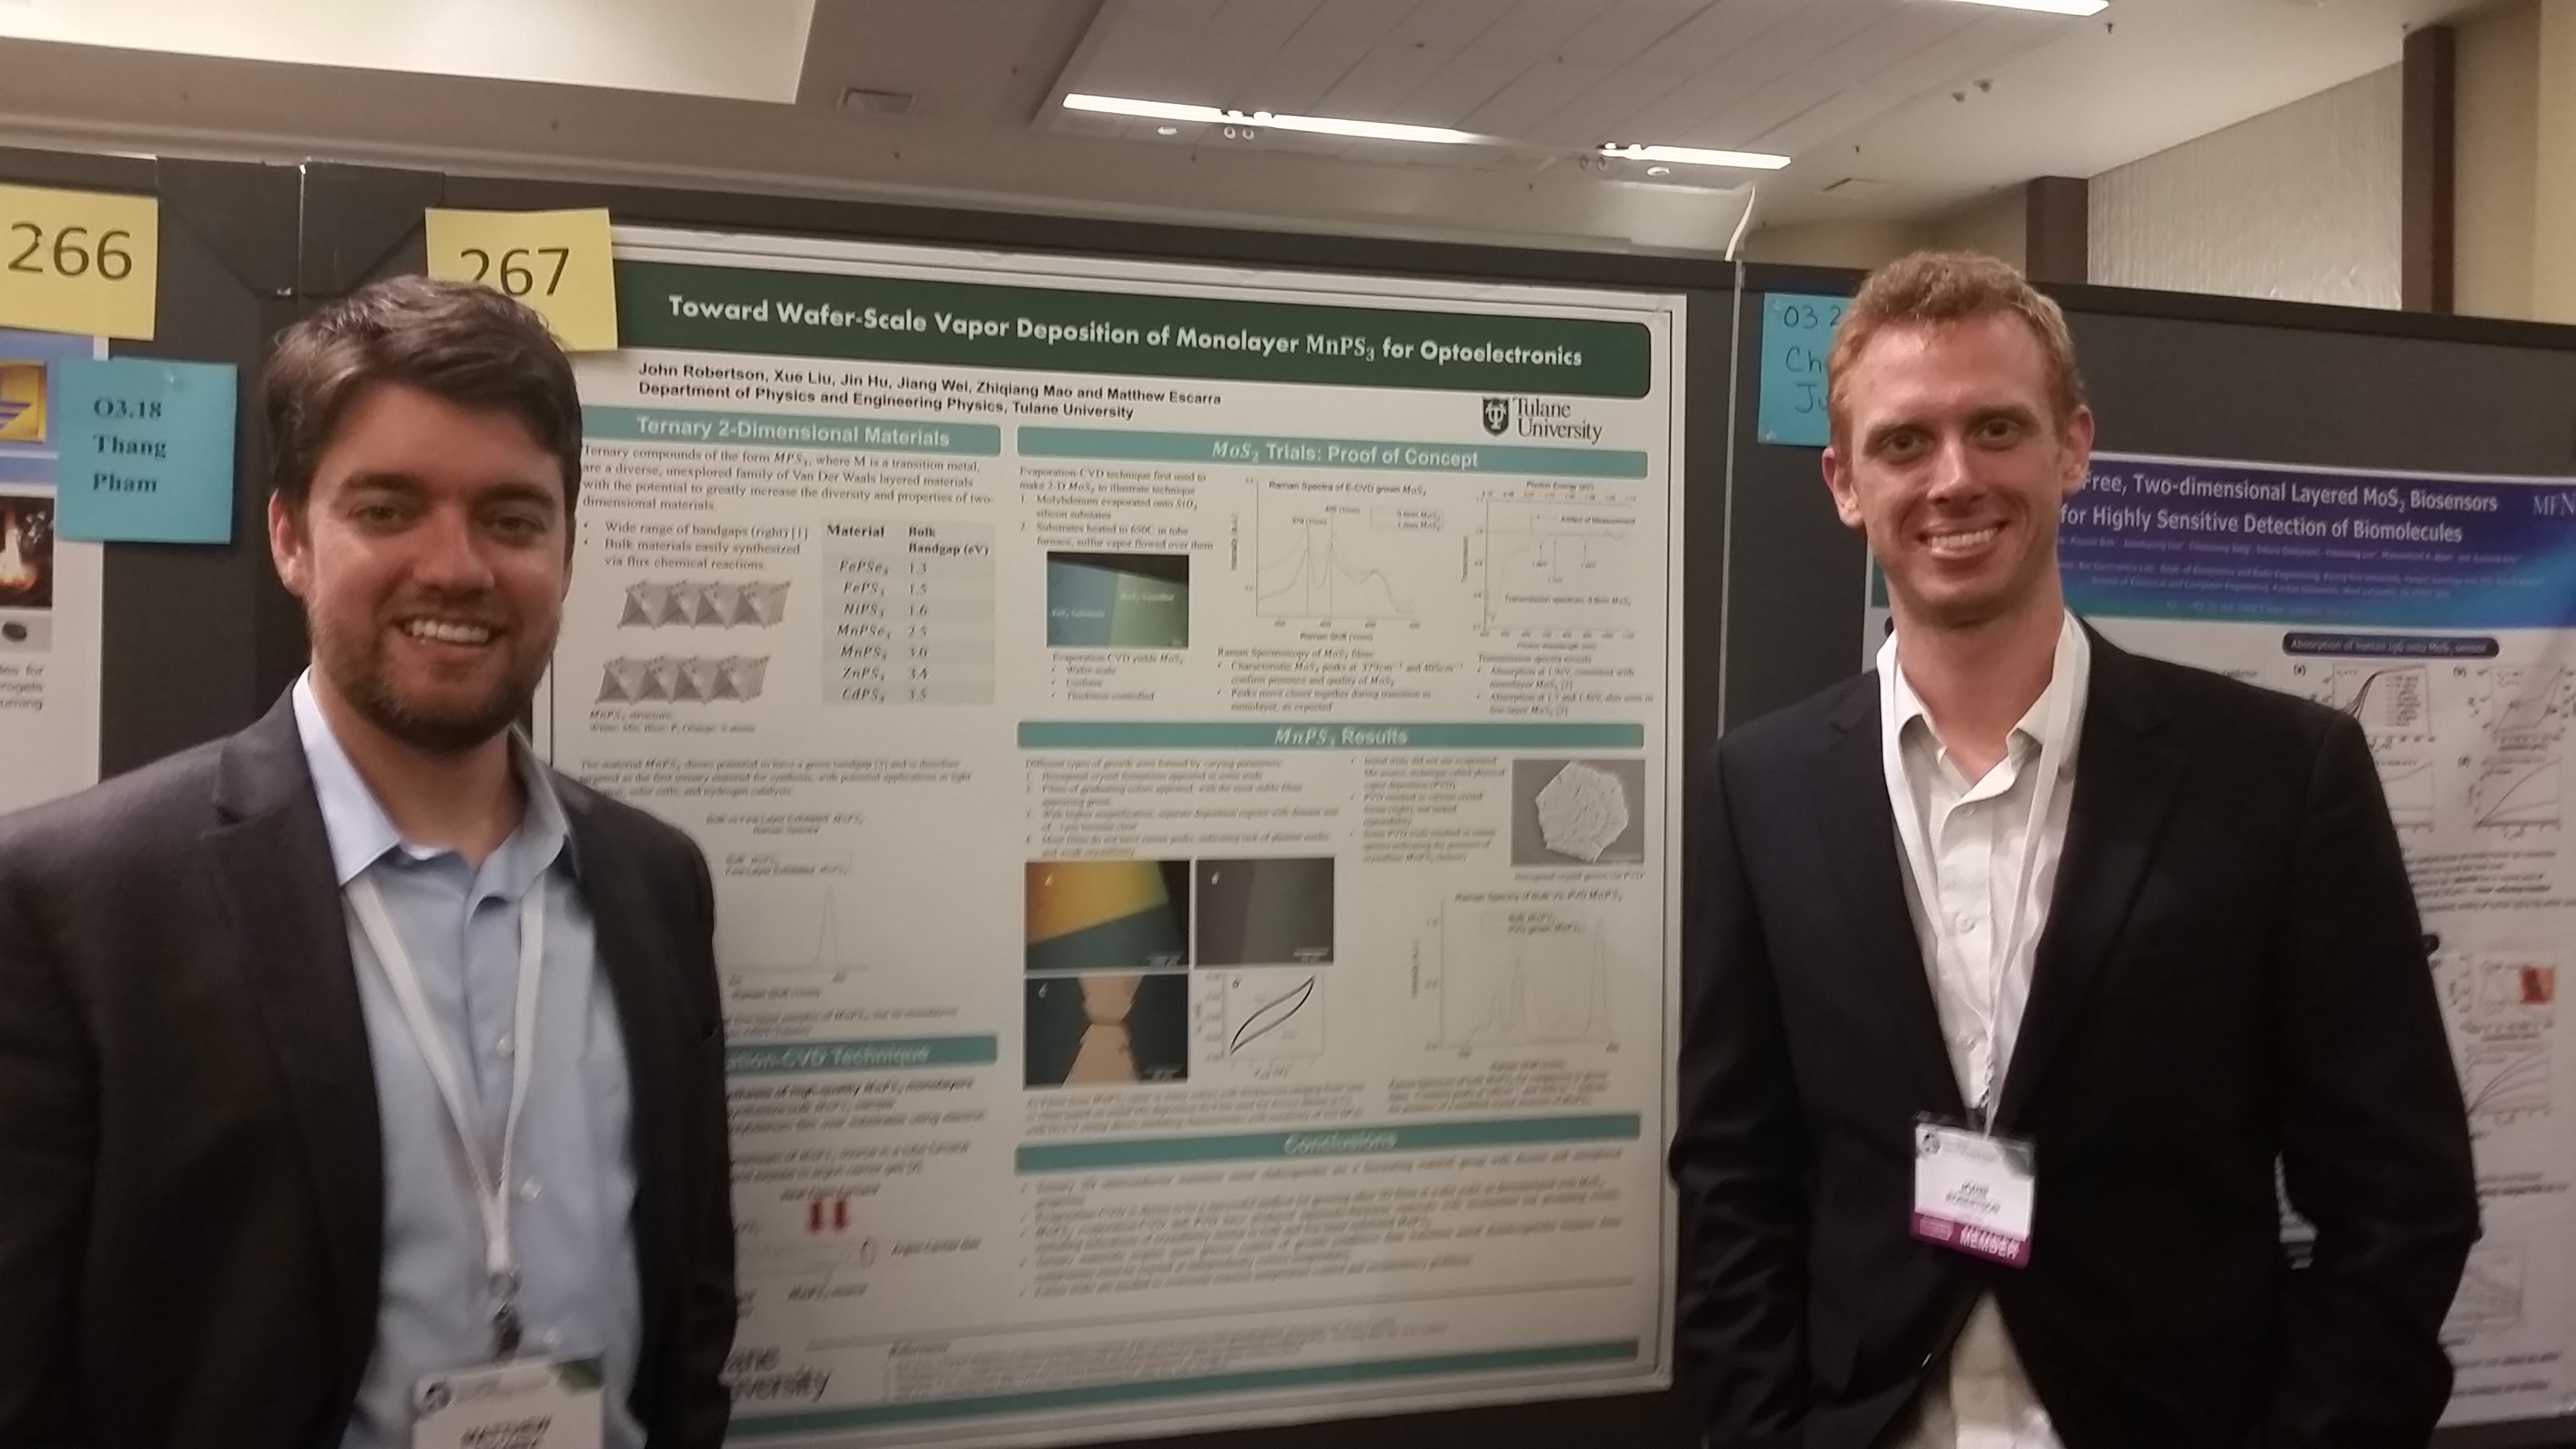 Spring Materials Research Society 